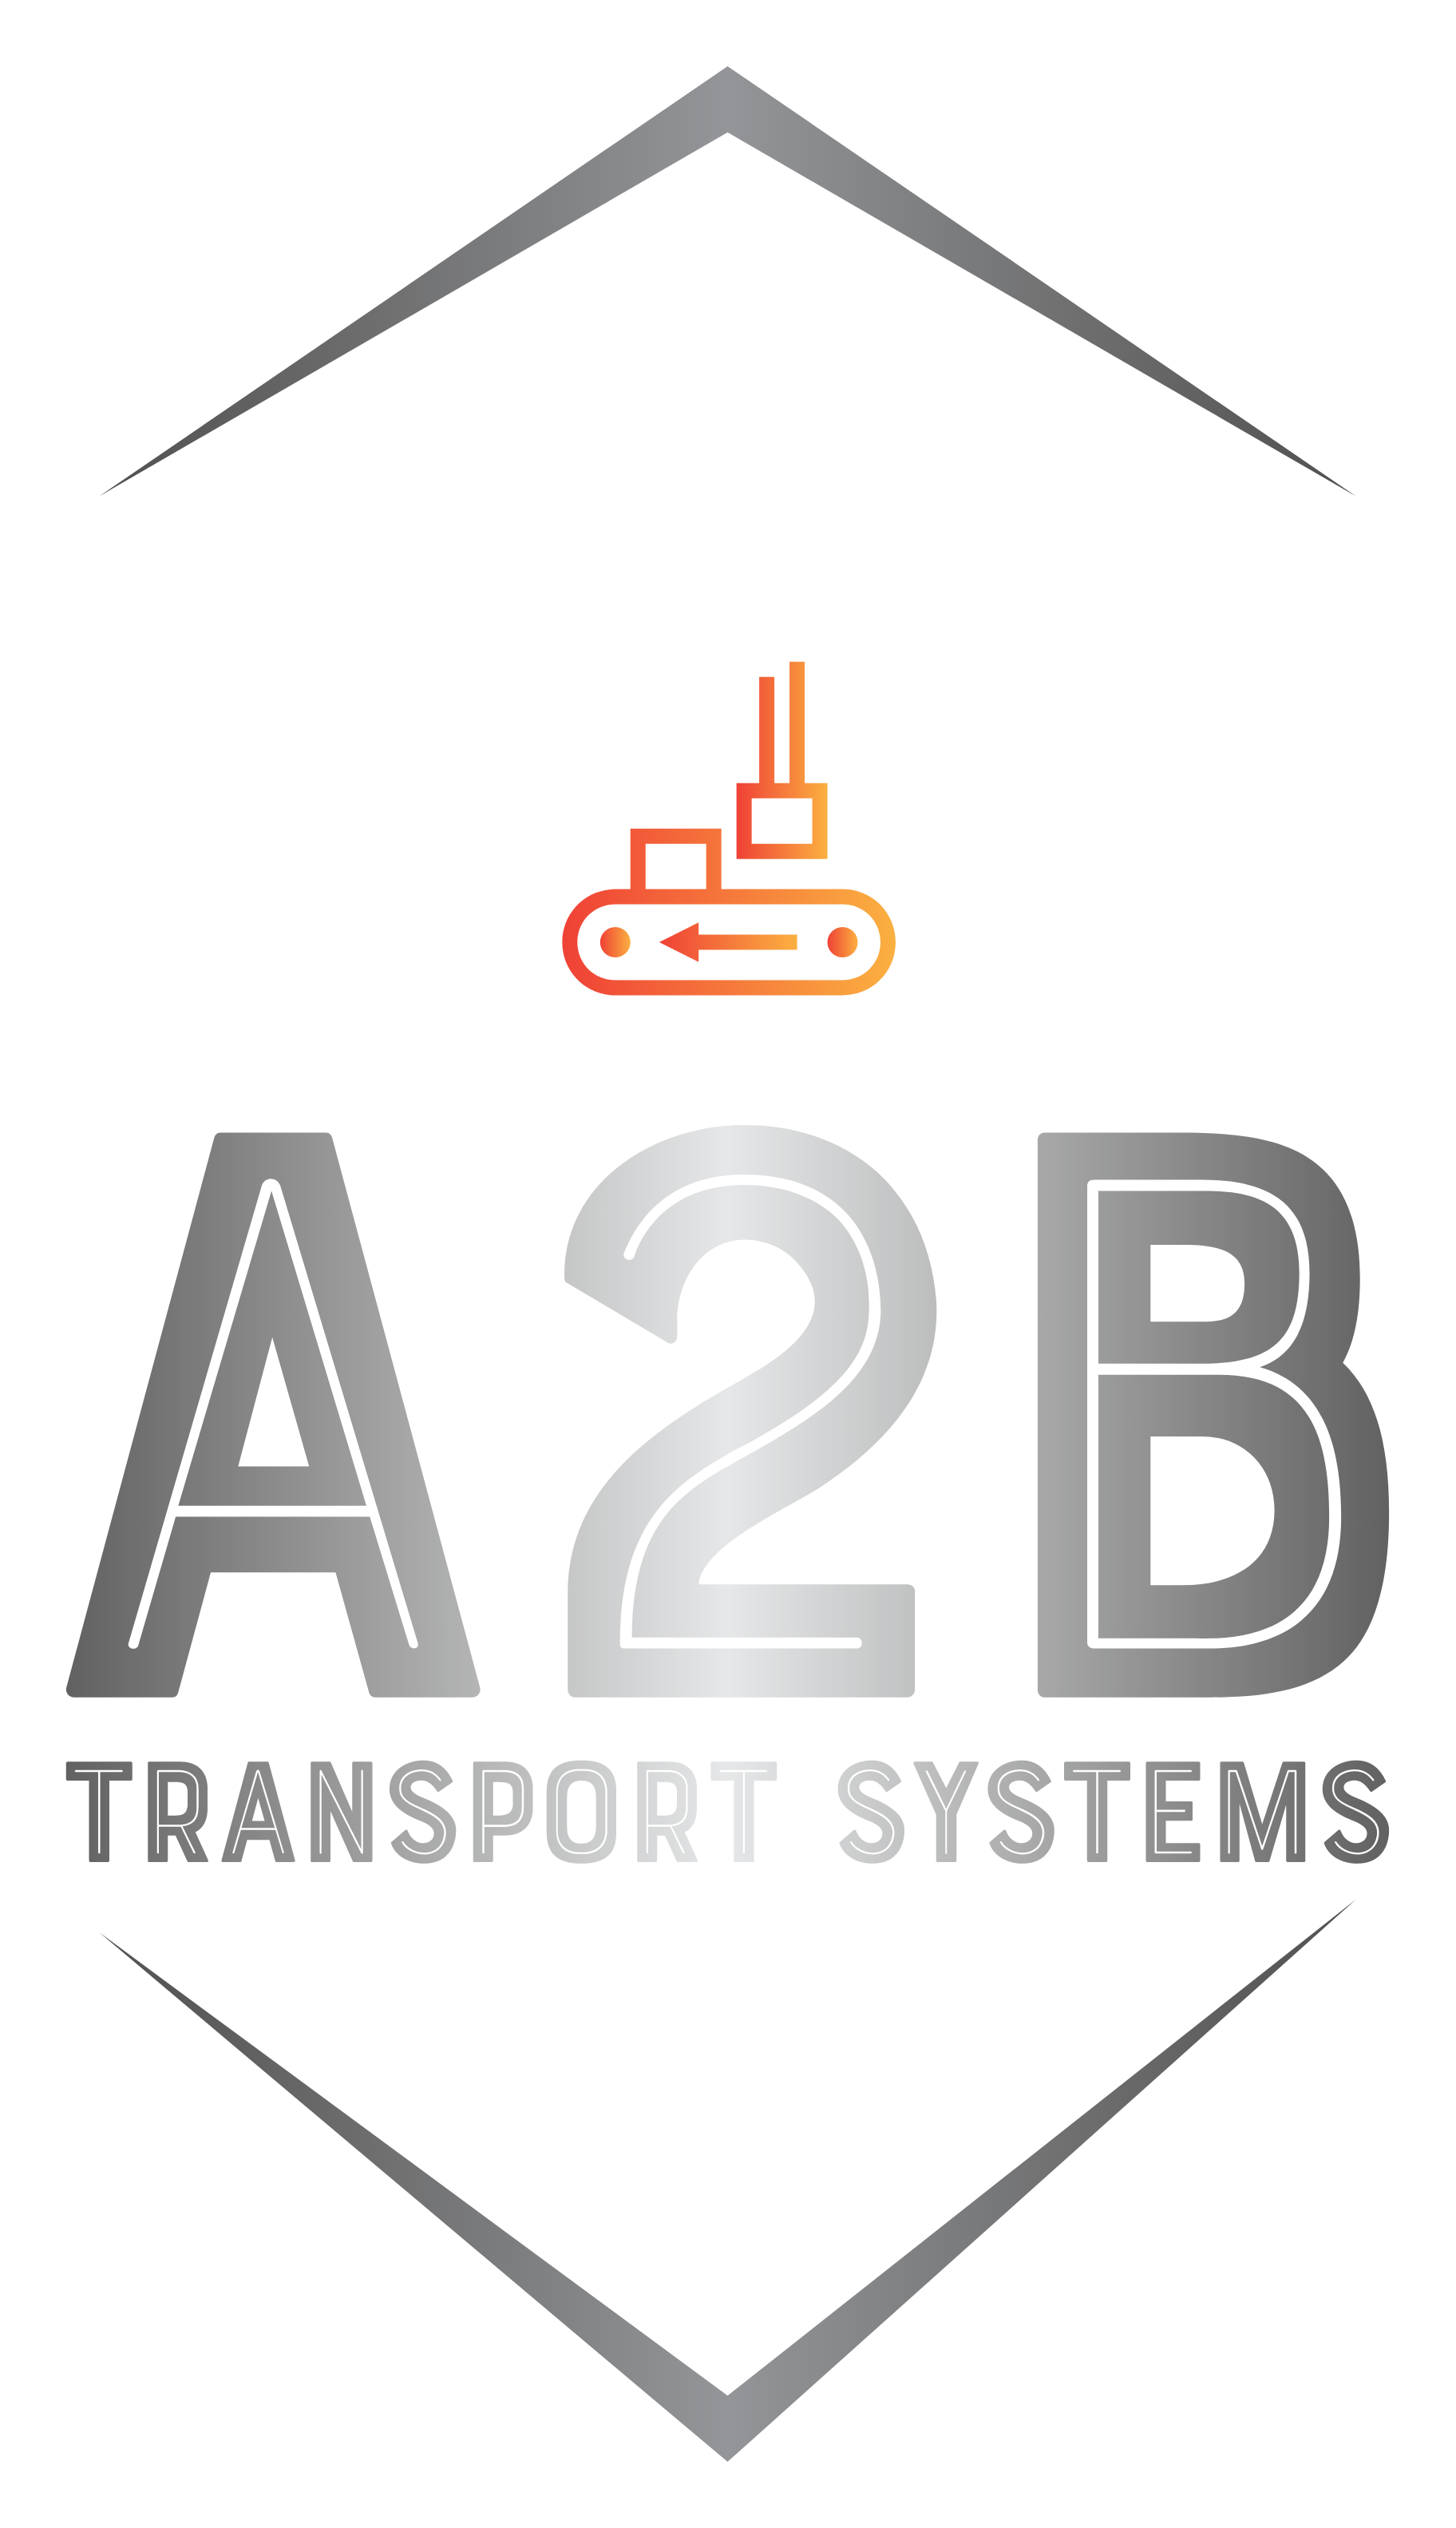 A2B Transport Systems